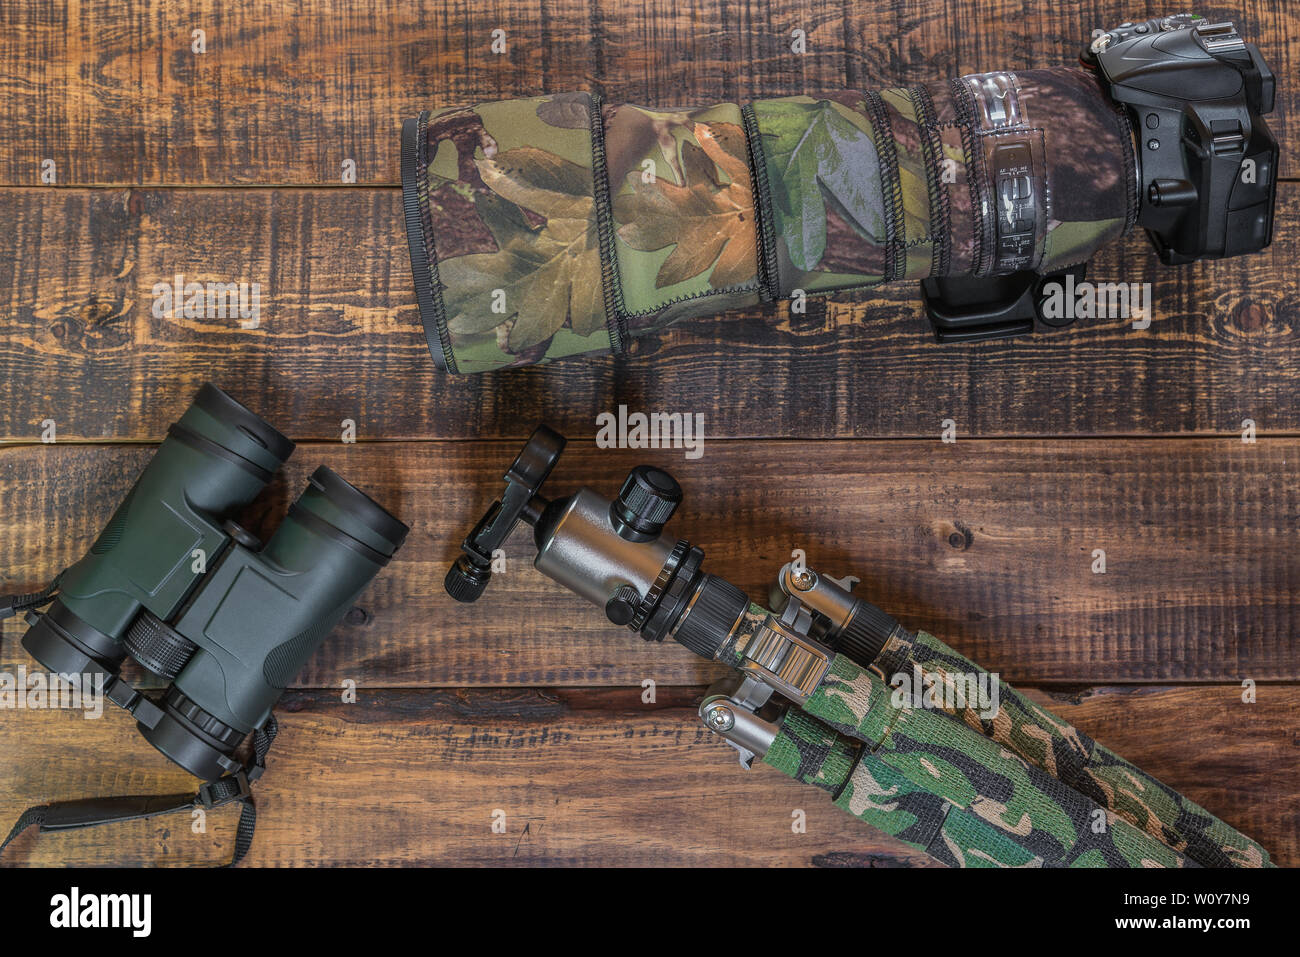 Equipment for the observation and photography of wild fauna on a rustic wooden table Stock Photo